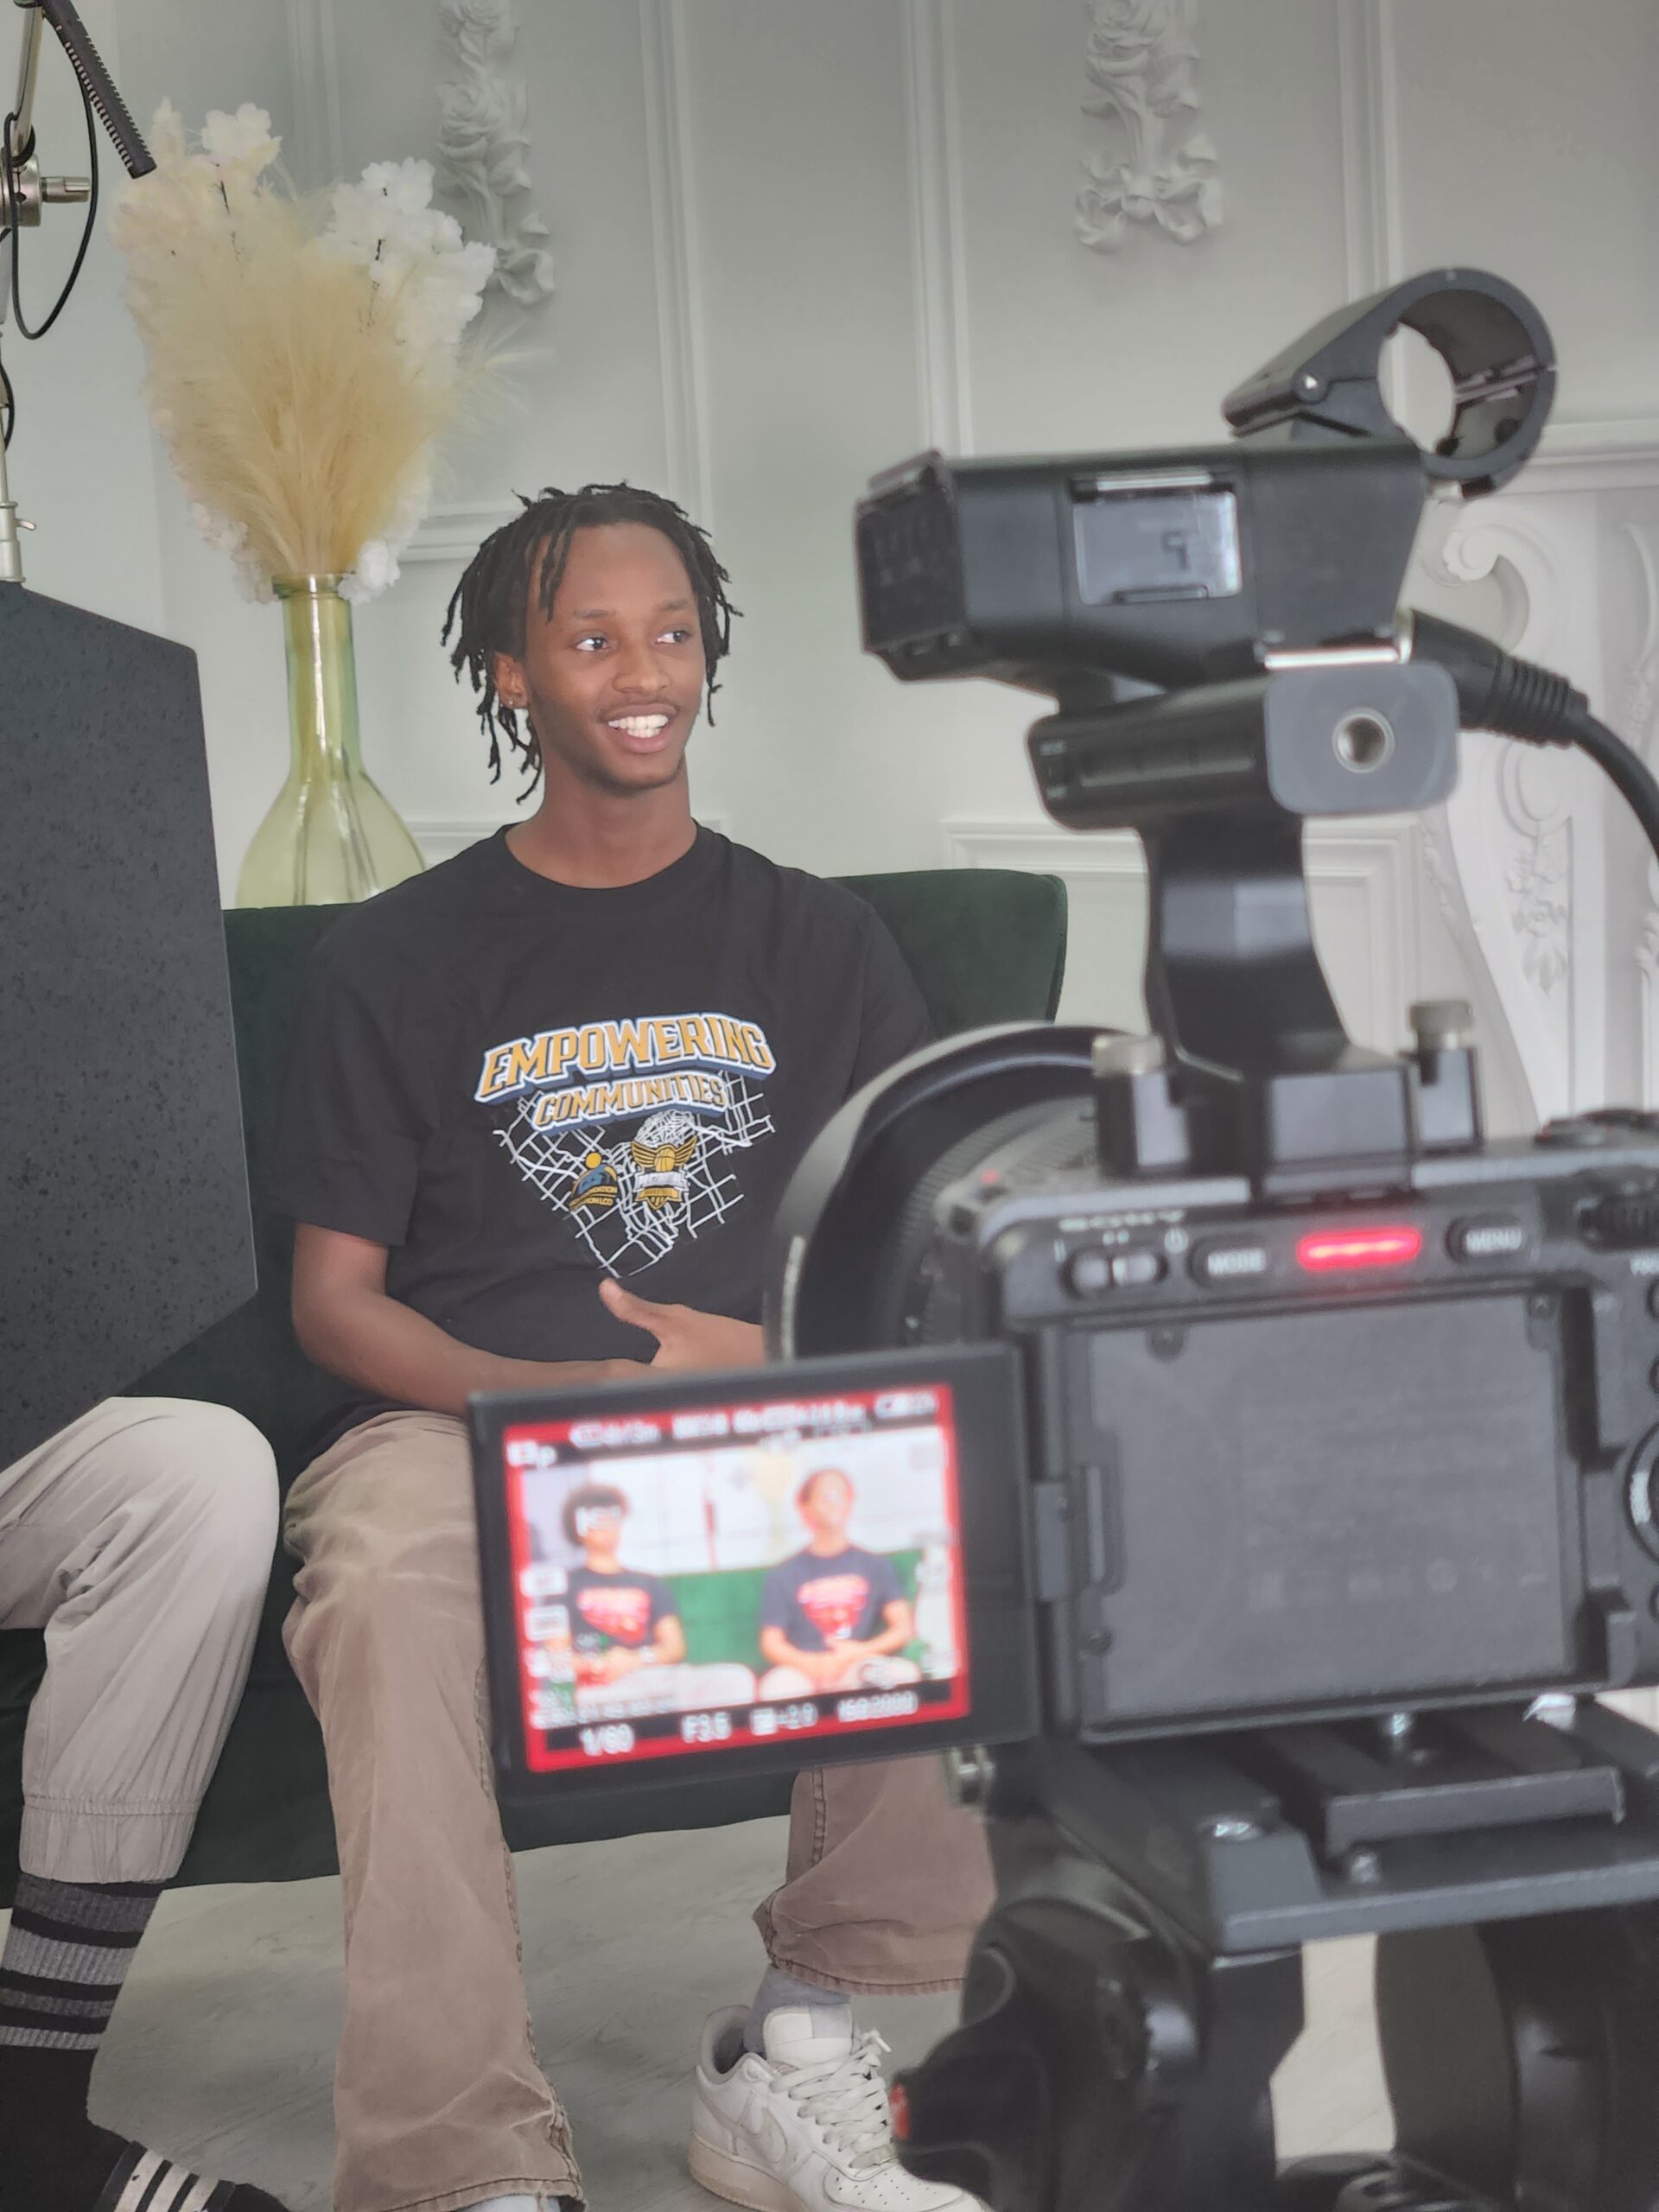 A young person smiles while sitting in front of a broadcasting camera.